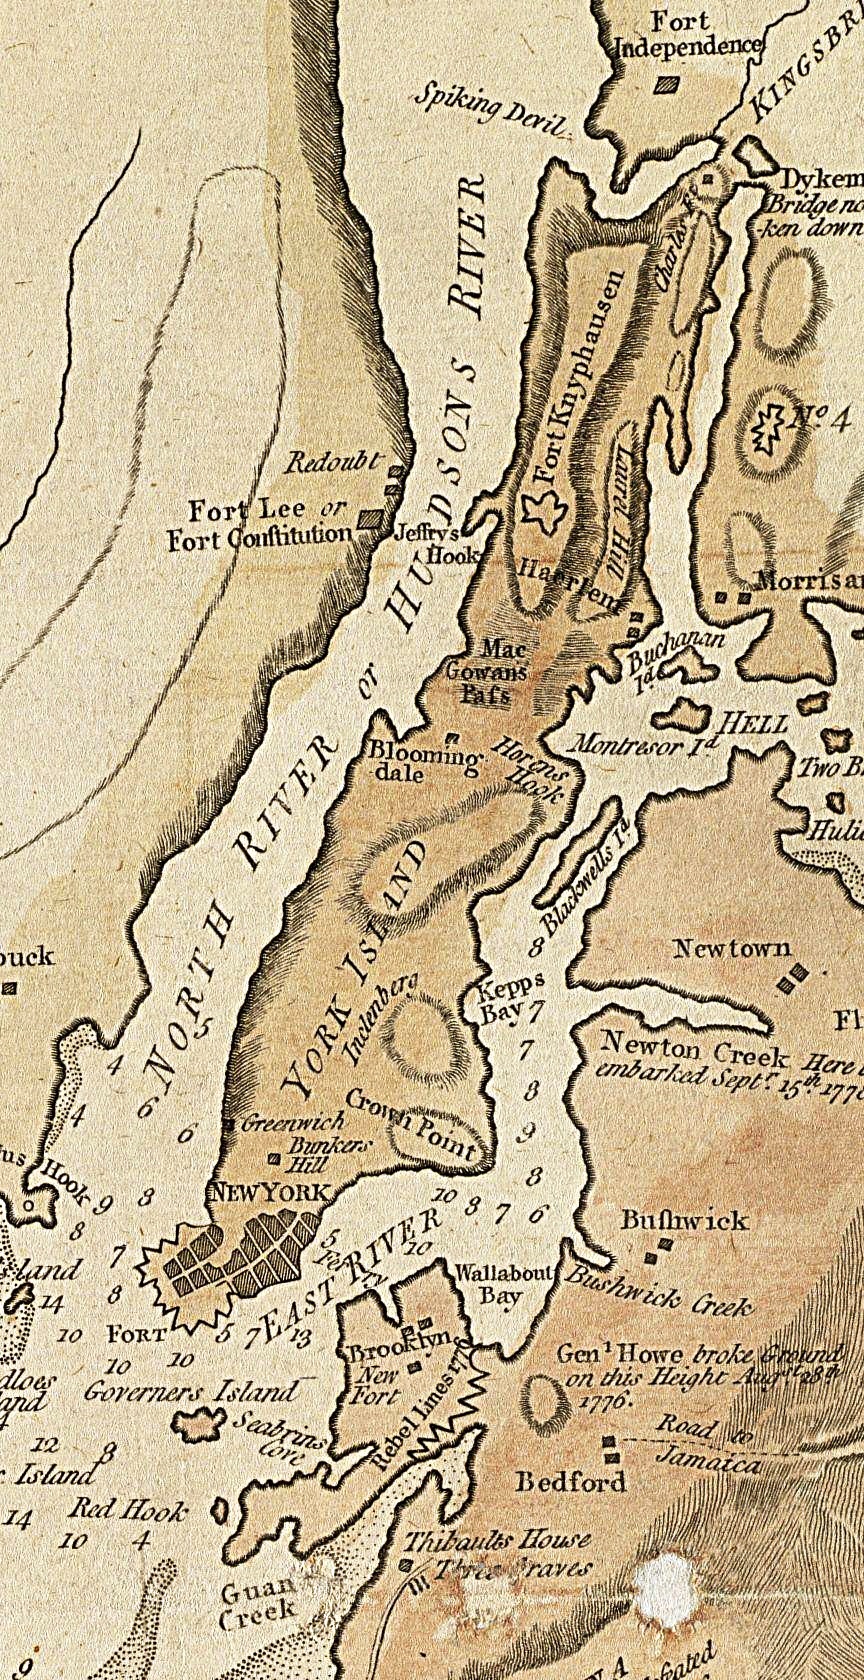 1781 map of
              what's now Randall's Island